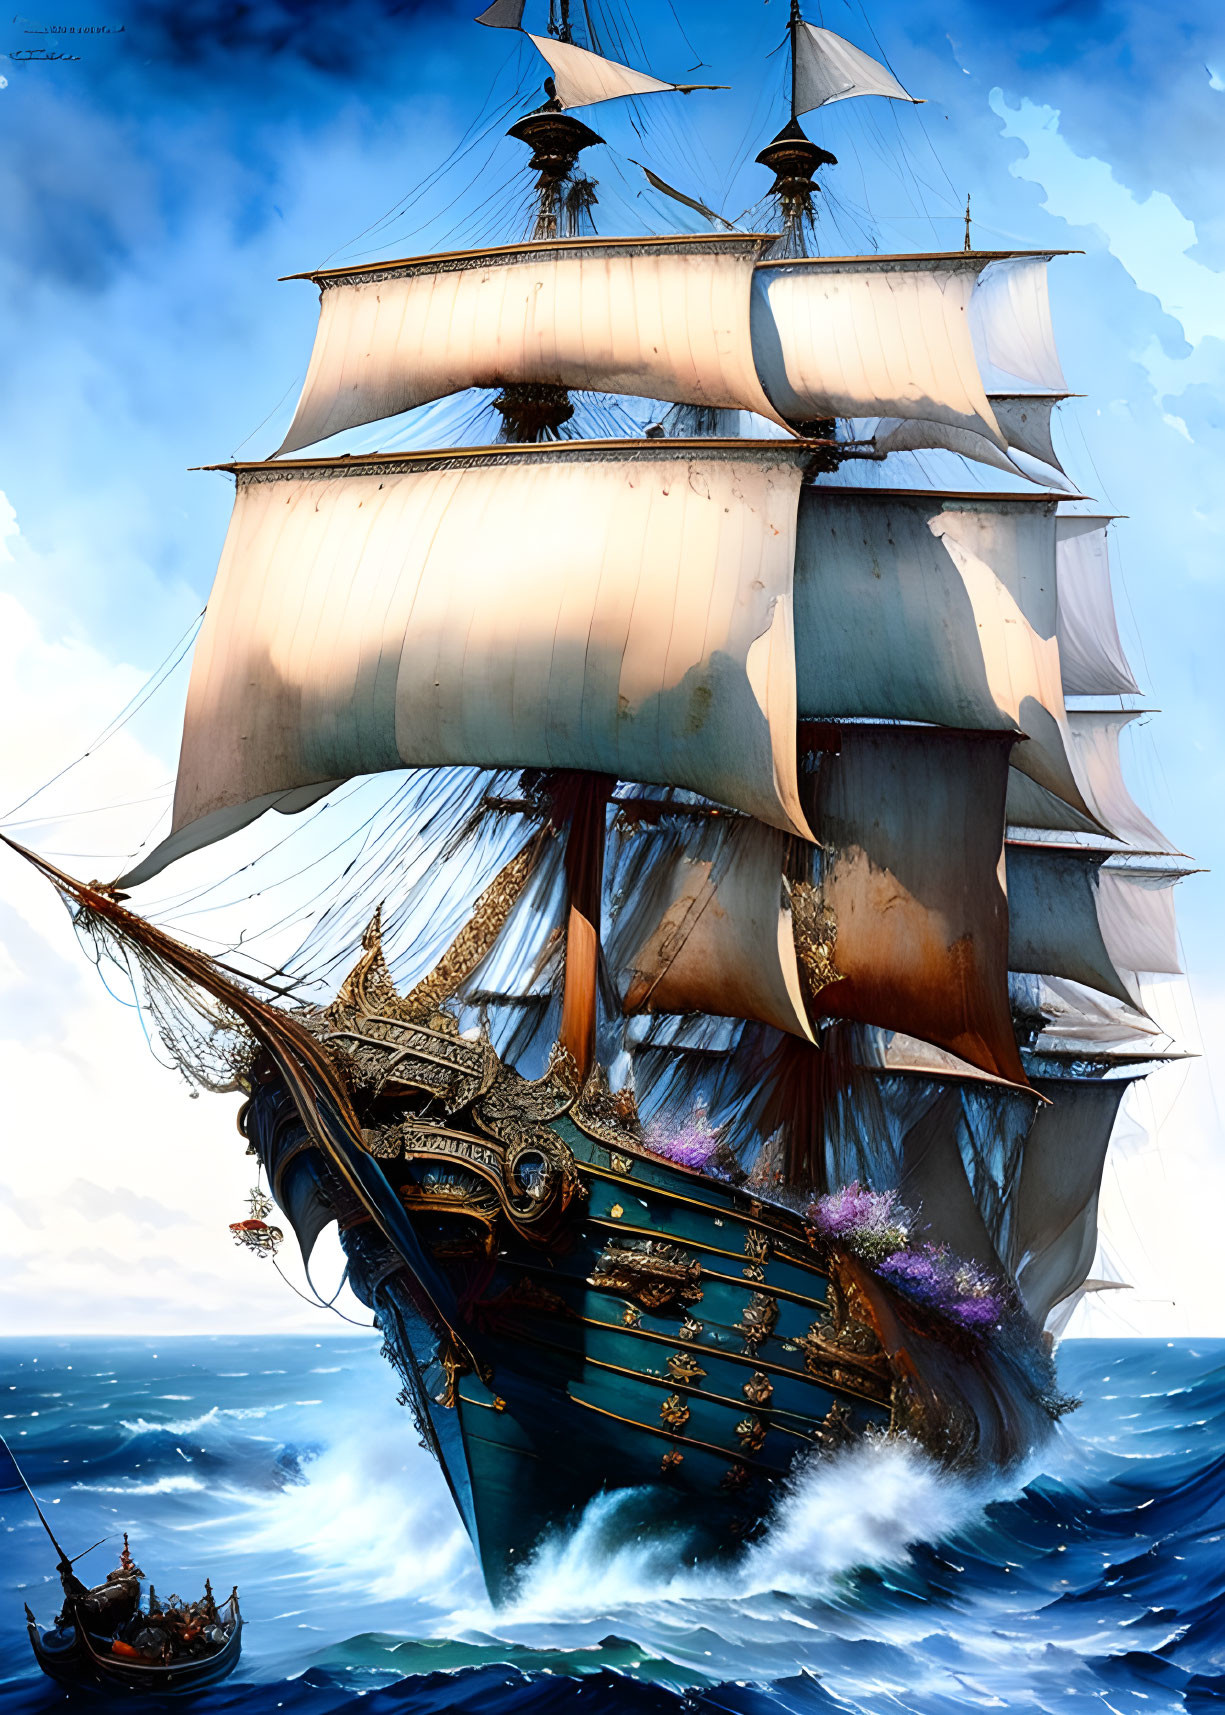 Historic tall ship sailing on the high seas with intricate bow detailing